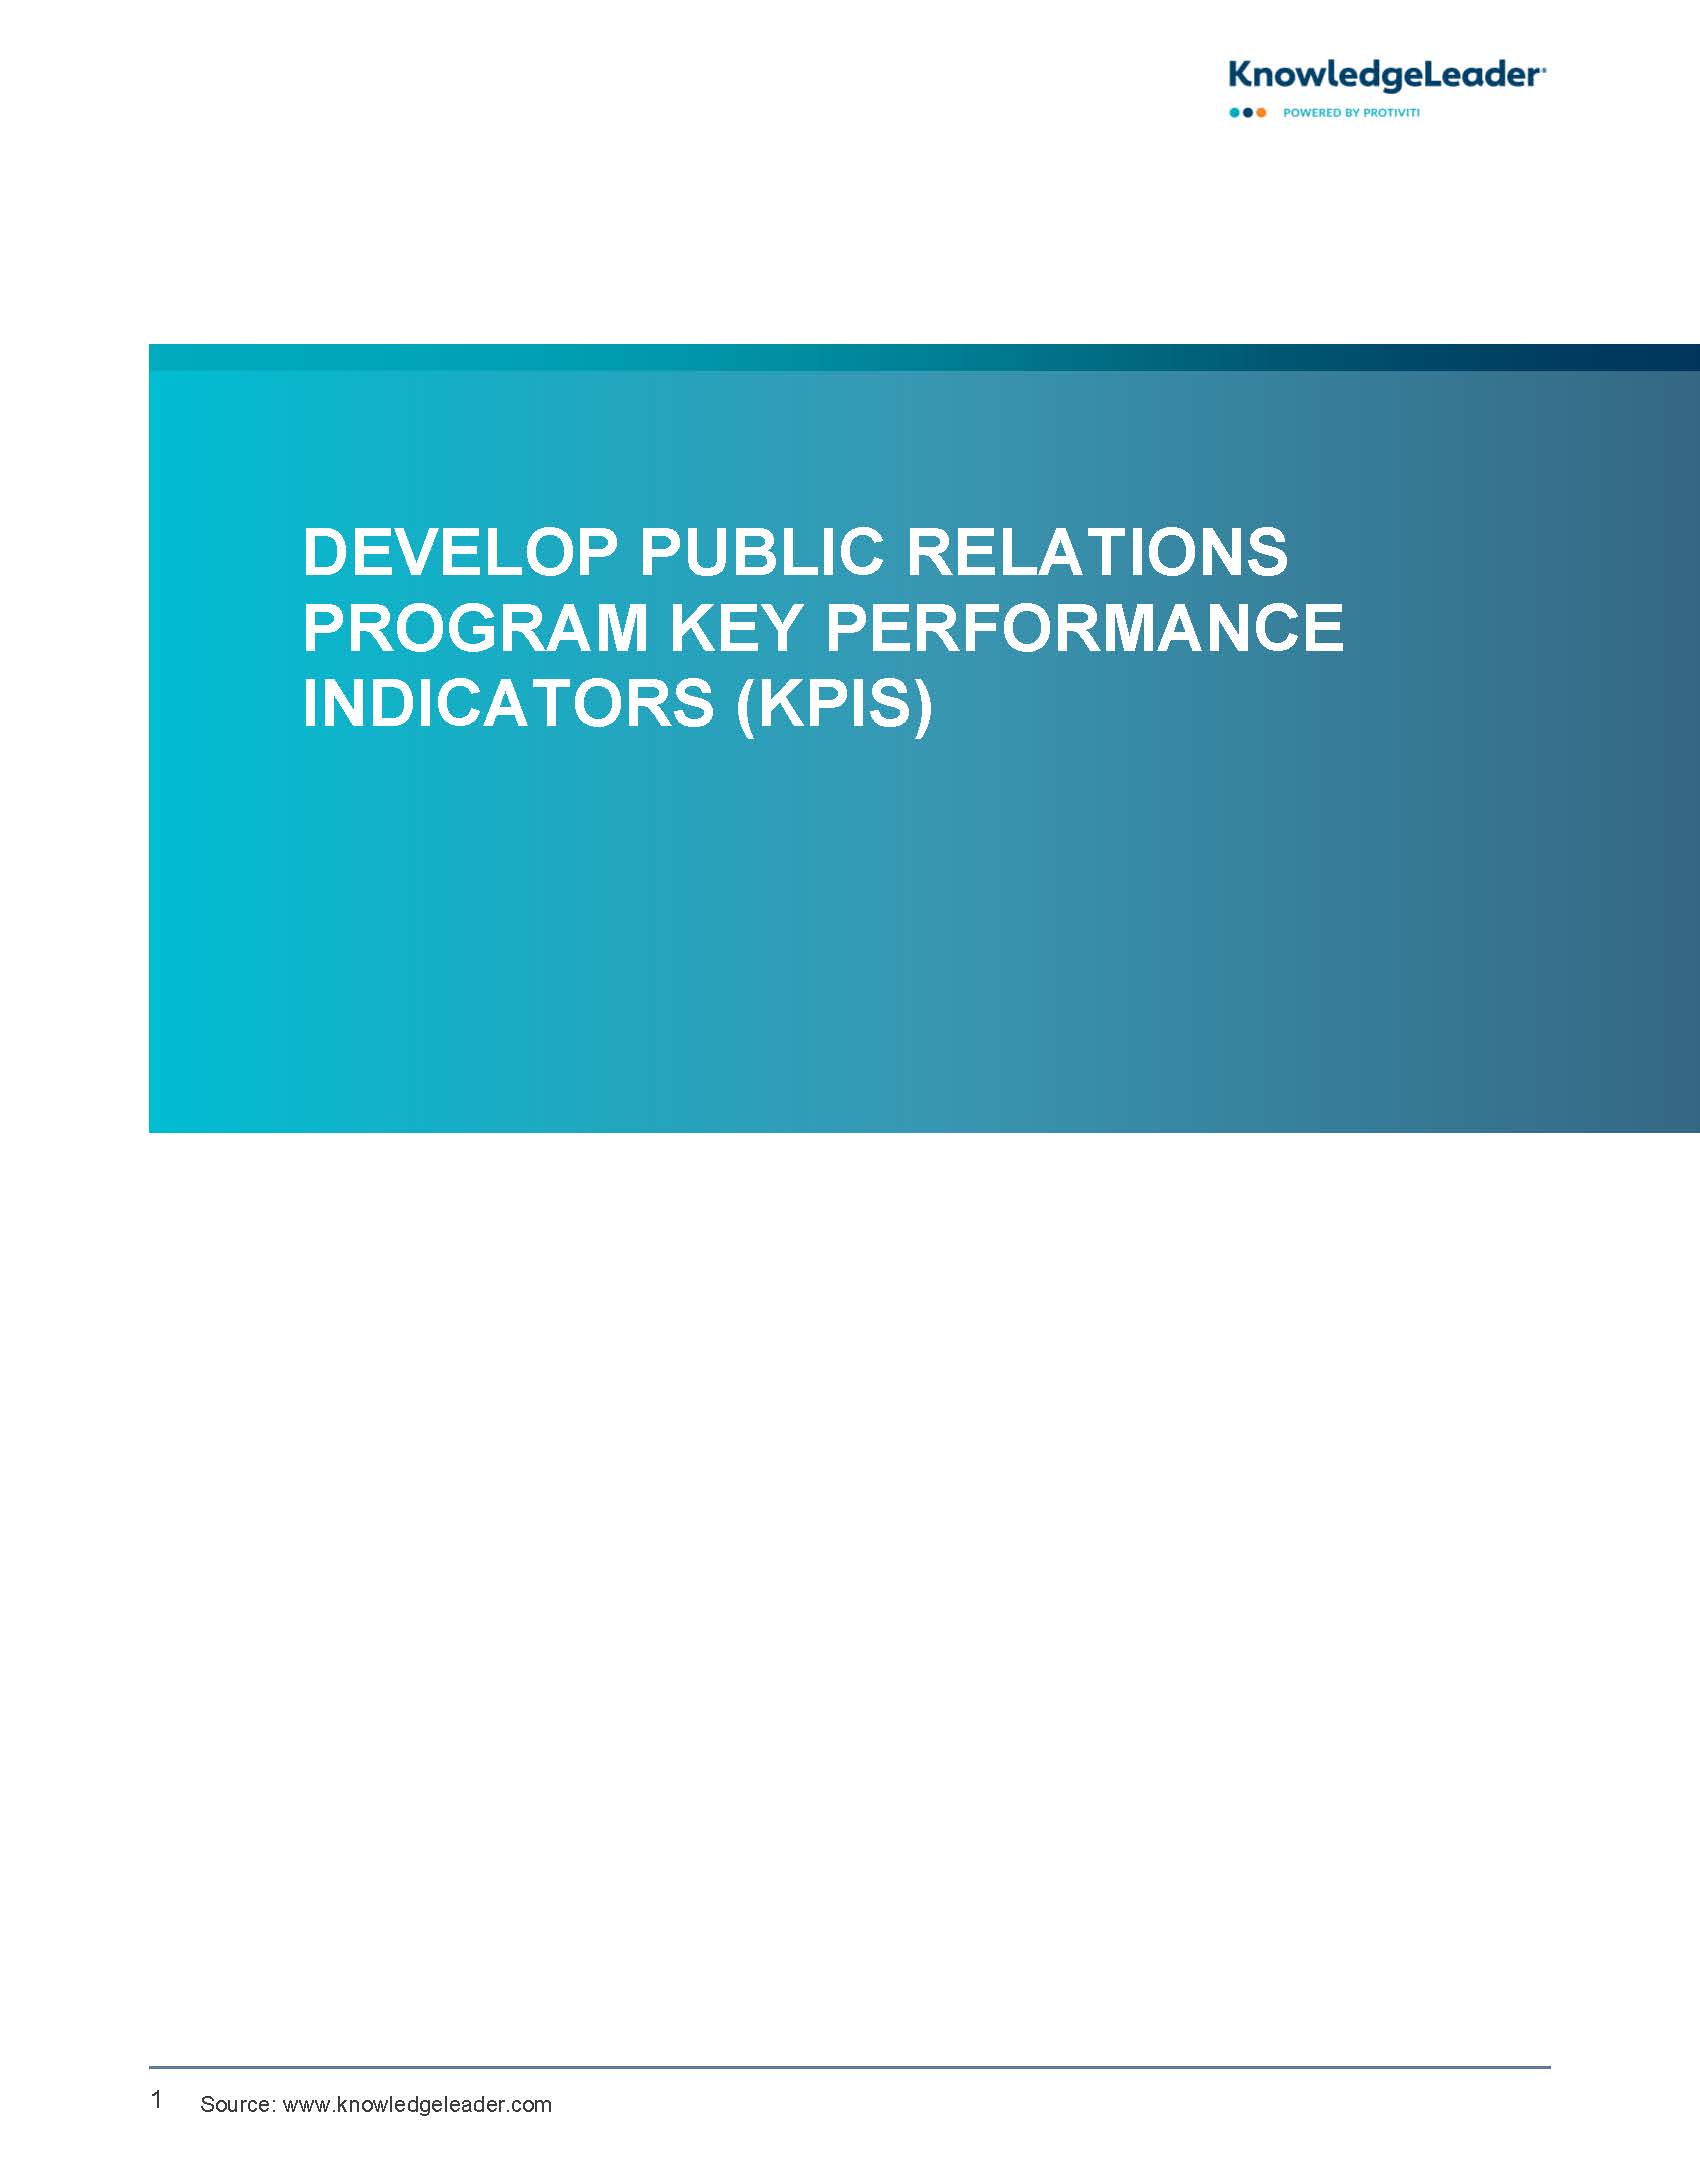 Screenshot of the first page of Develop Public Relations Program Key Performance Indicators (KPIs)